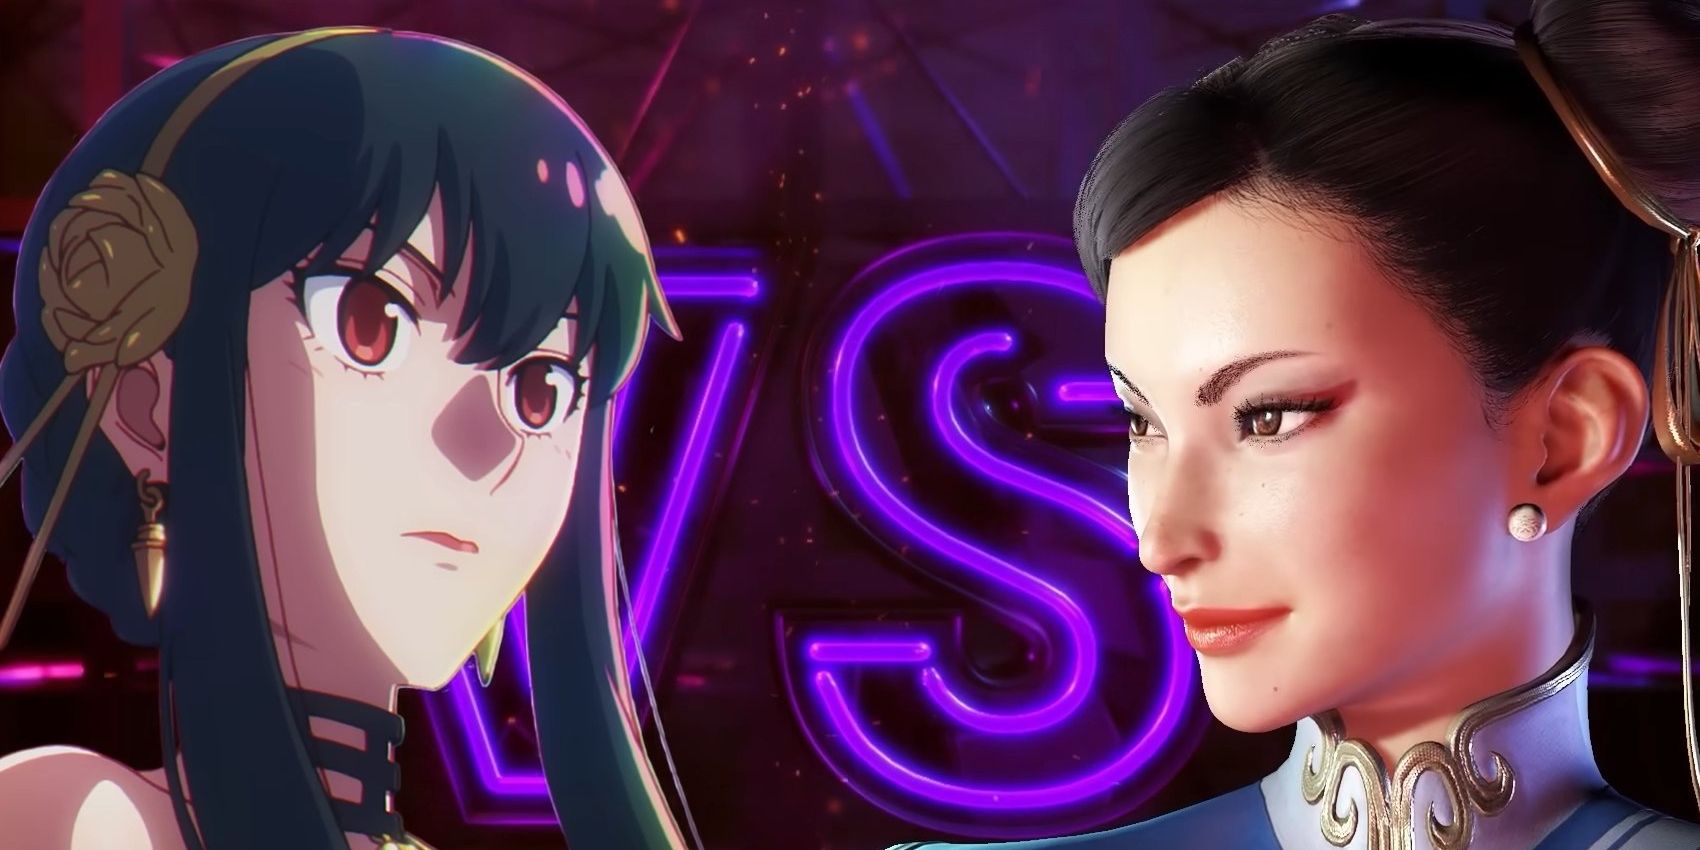 Yor Forger vs. Chun-Li in special Street Fighter 6 video with Spy x Family.